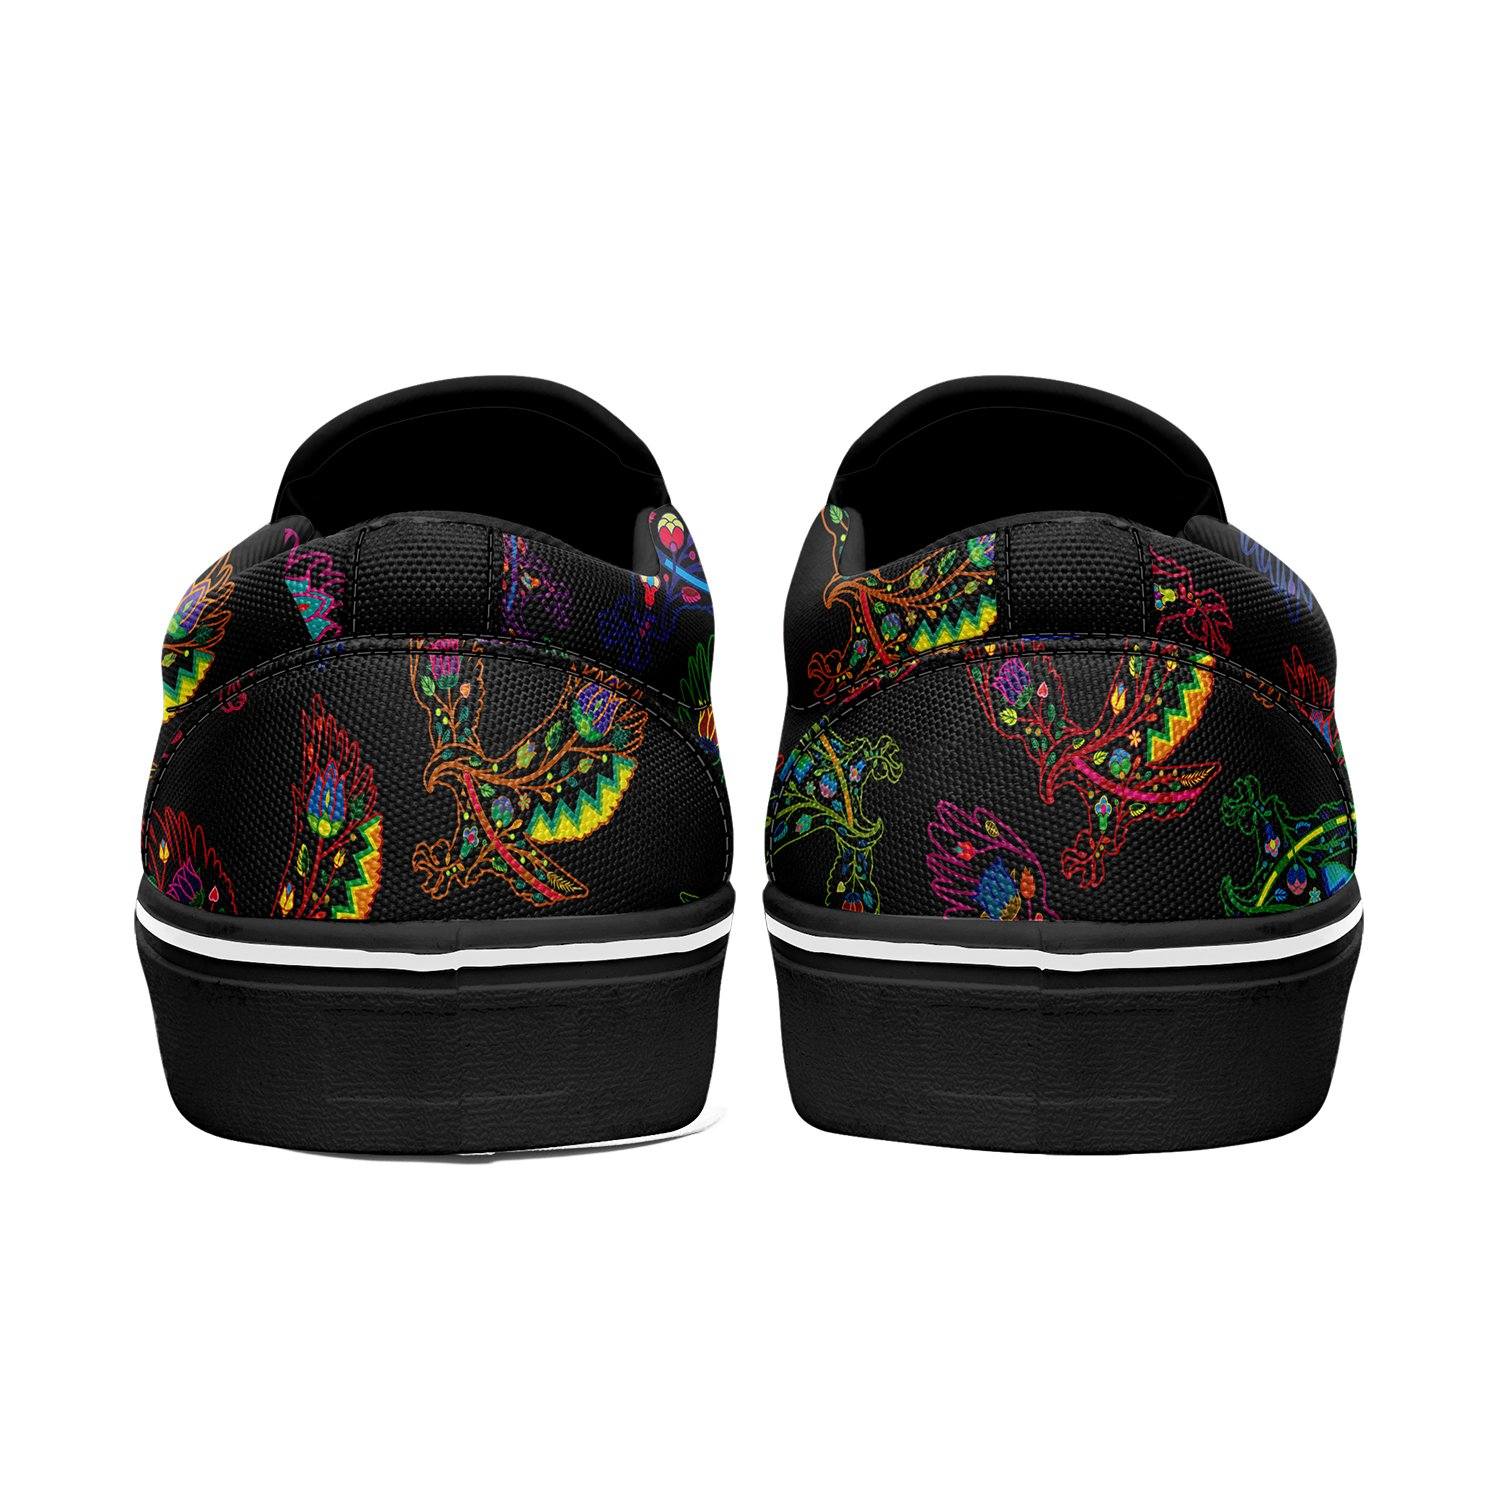 Floral Eagle Otoyimm Canvas Slip On Shoes otoyimm Herman 